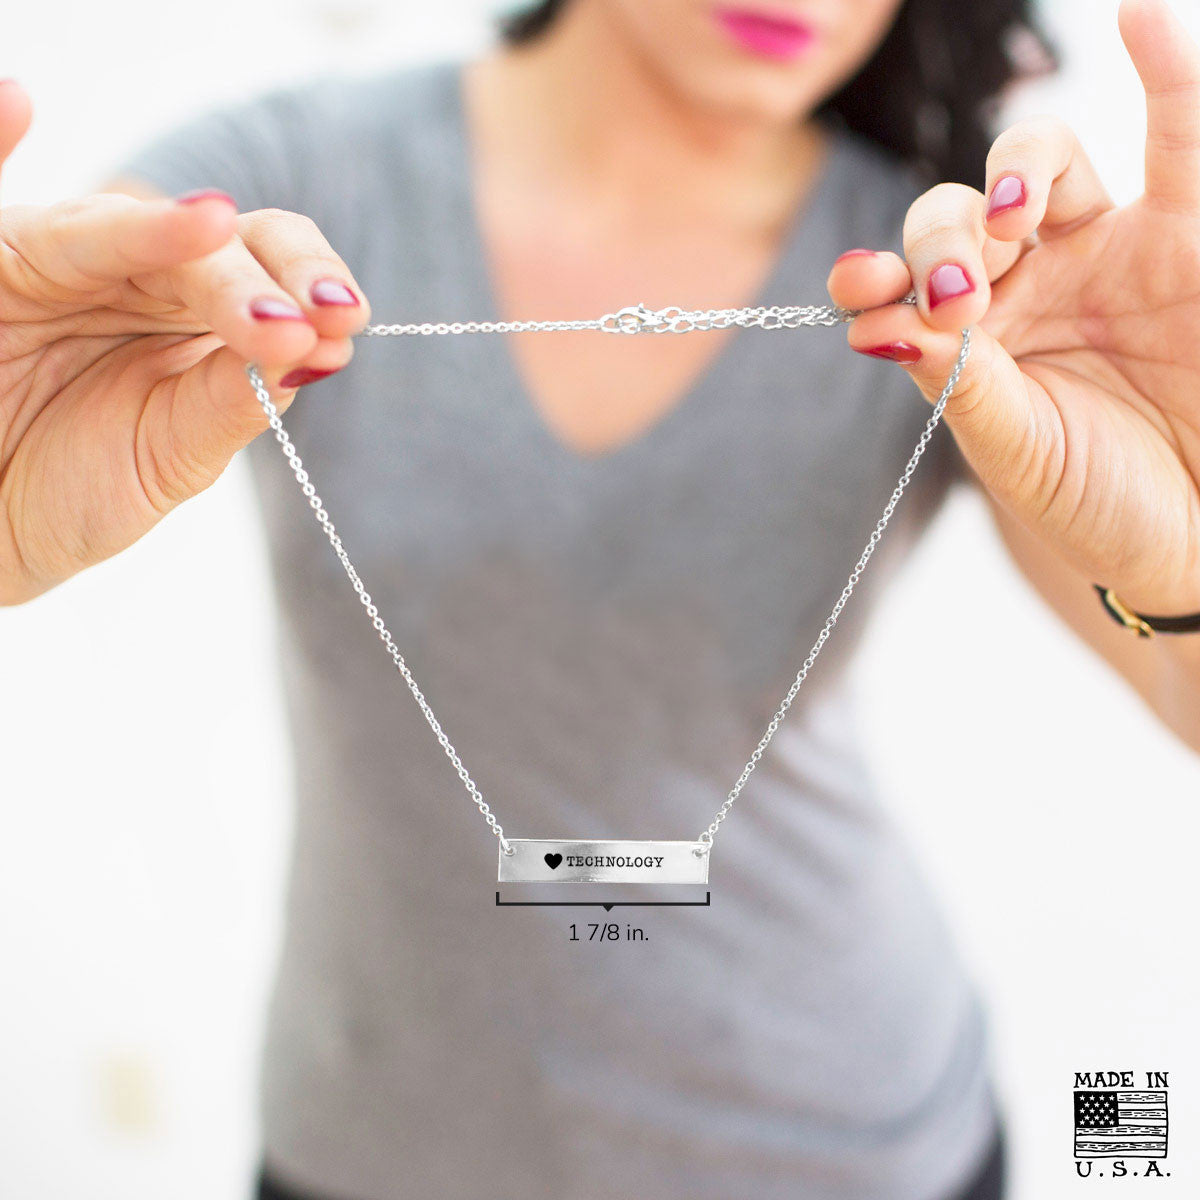 I Love Technology Gold / Silver Bar Necklace - pipercleo.com